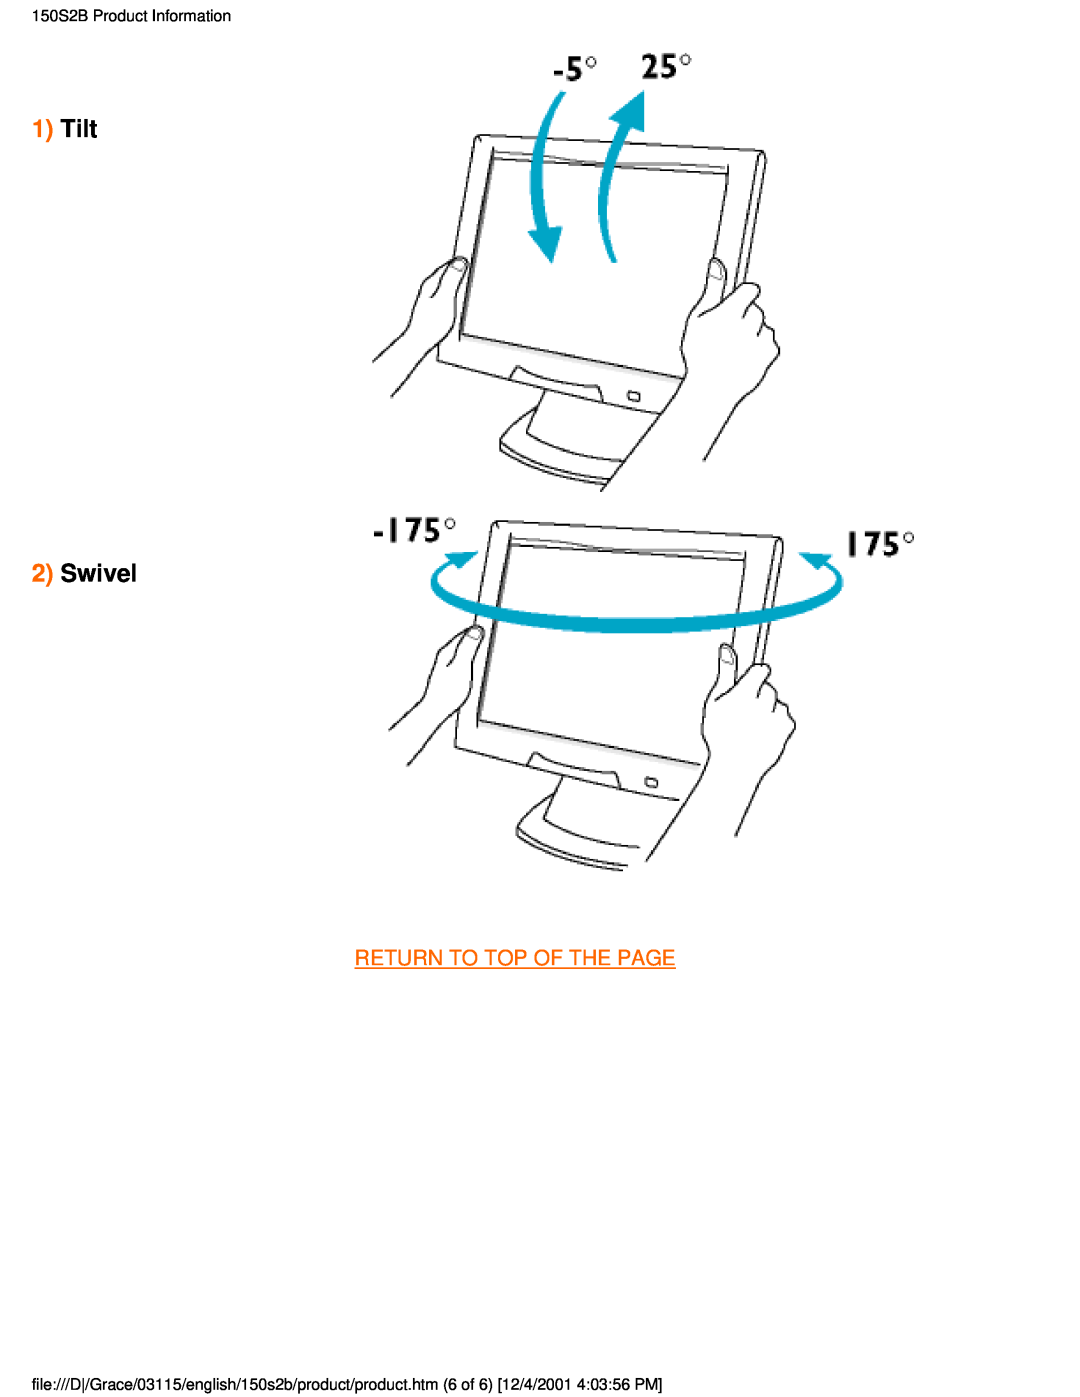 Philips user manual Tilt 2 Swivel, Return To Top Of The Page, 150S2B Product Information 